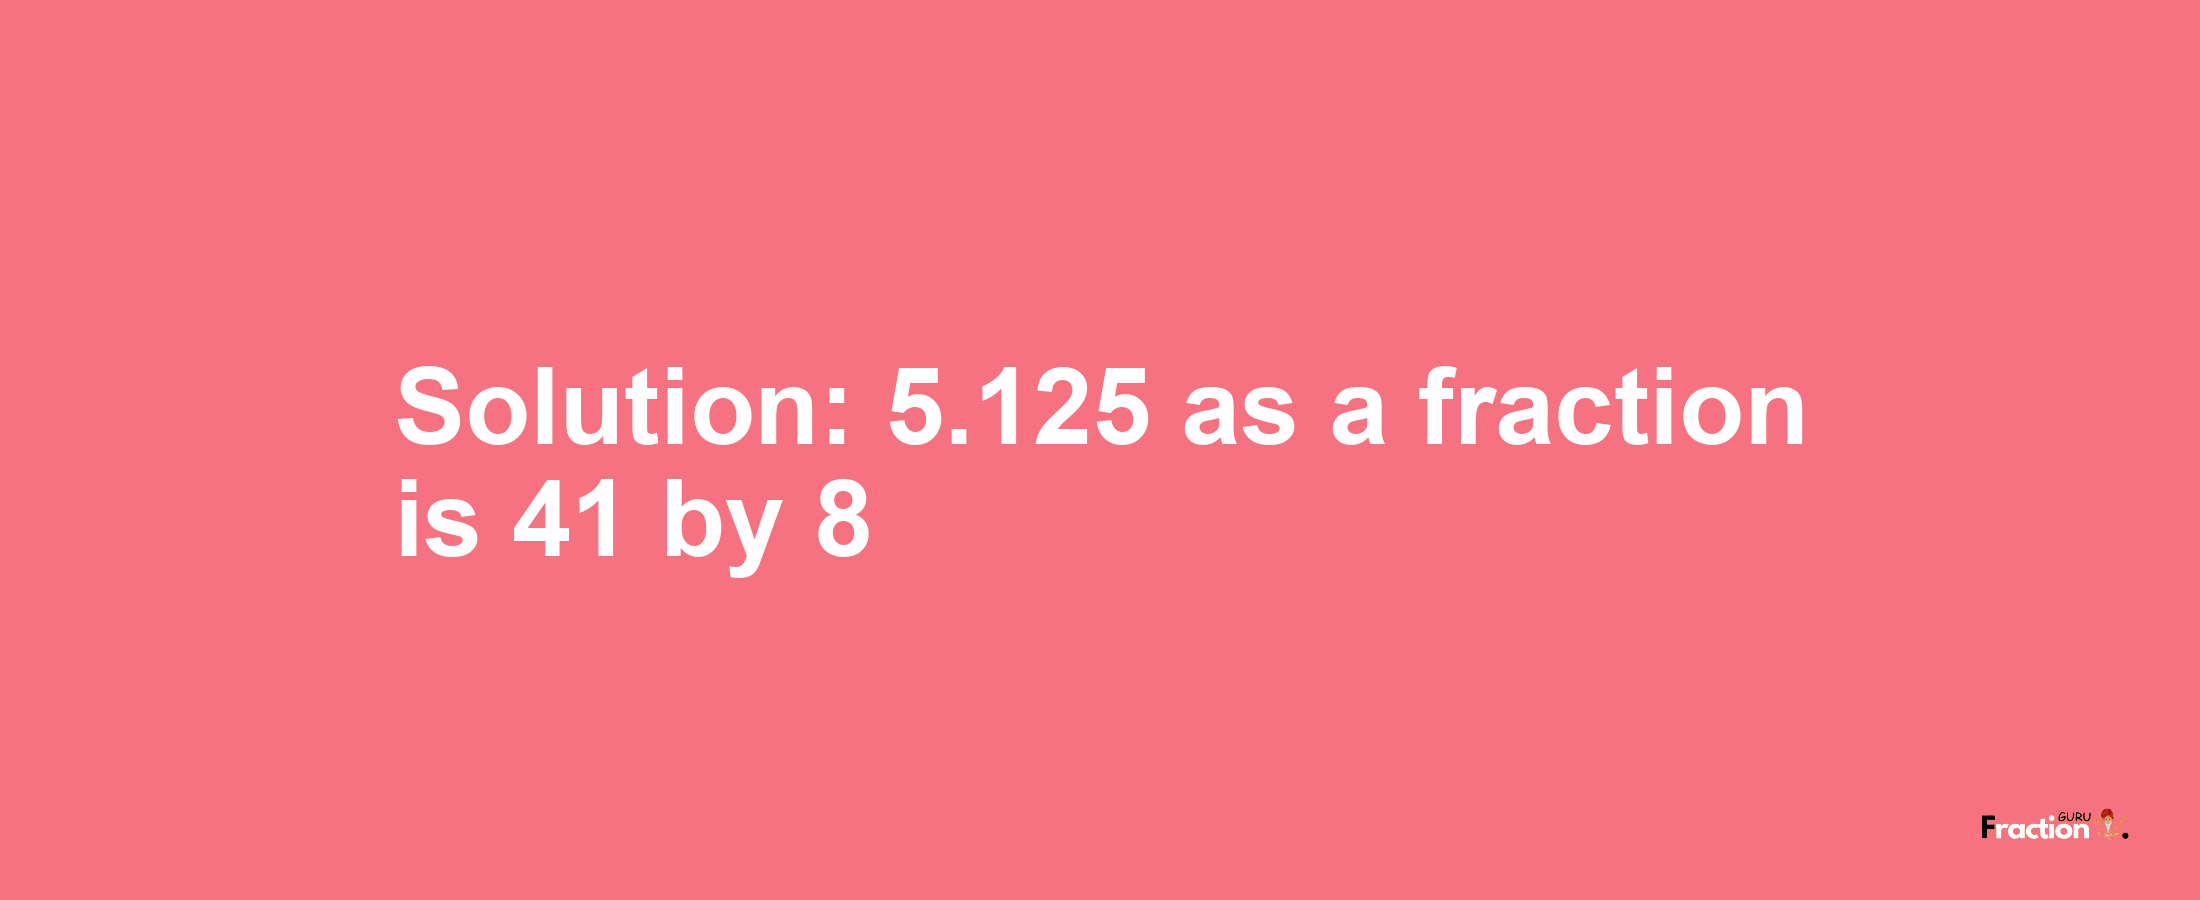 Solution:5.125 as a fraction is 41/8